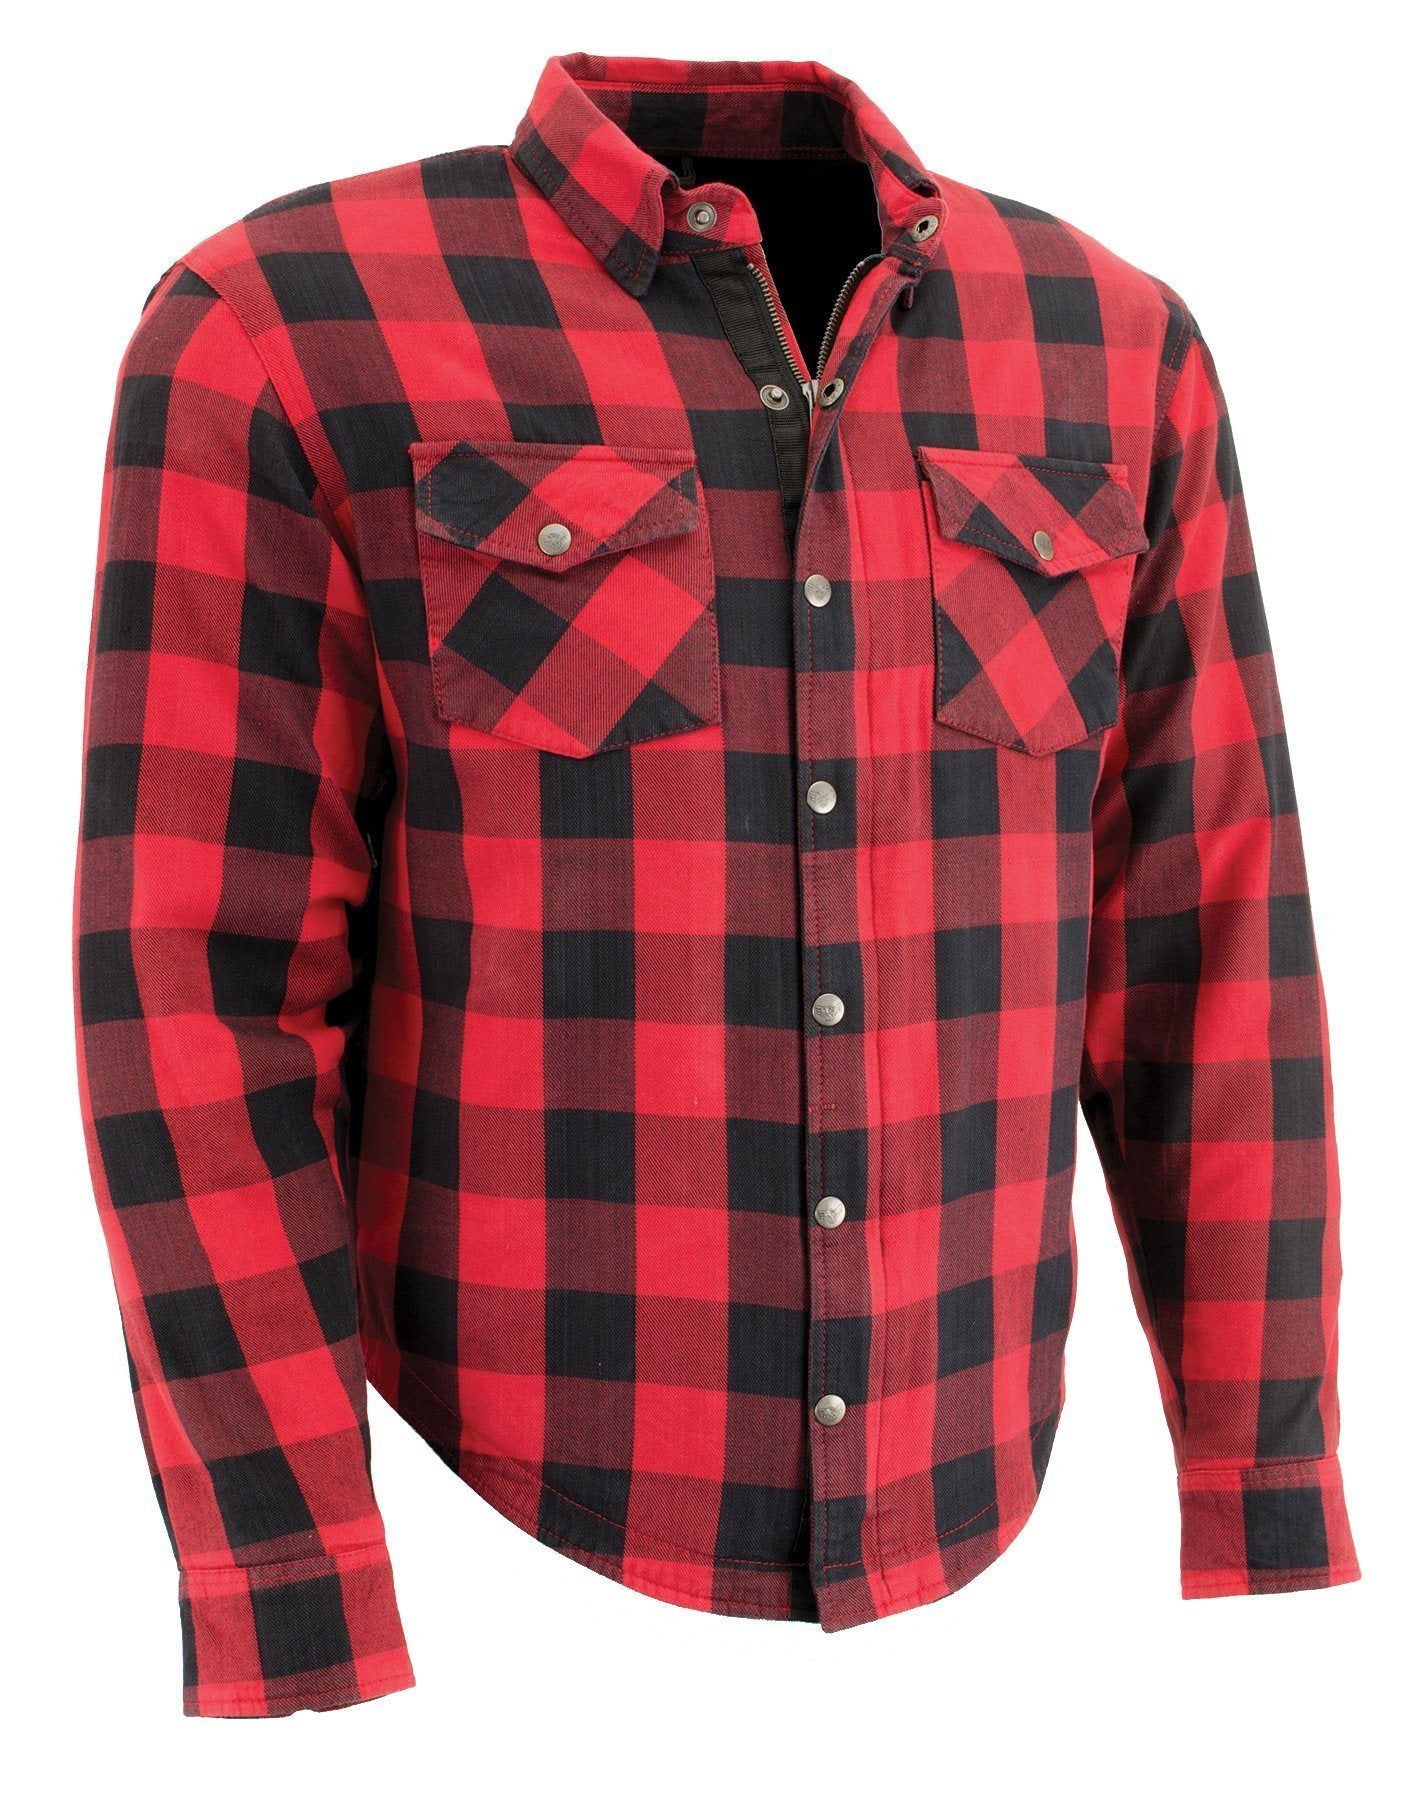 Milwaukee Leather MPM1631 Men's Plaid Flannel Biker Shirt with CE Approved Armor - Reinforced w/ Aramid Fiber